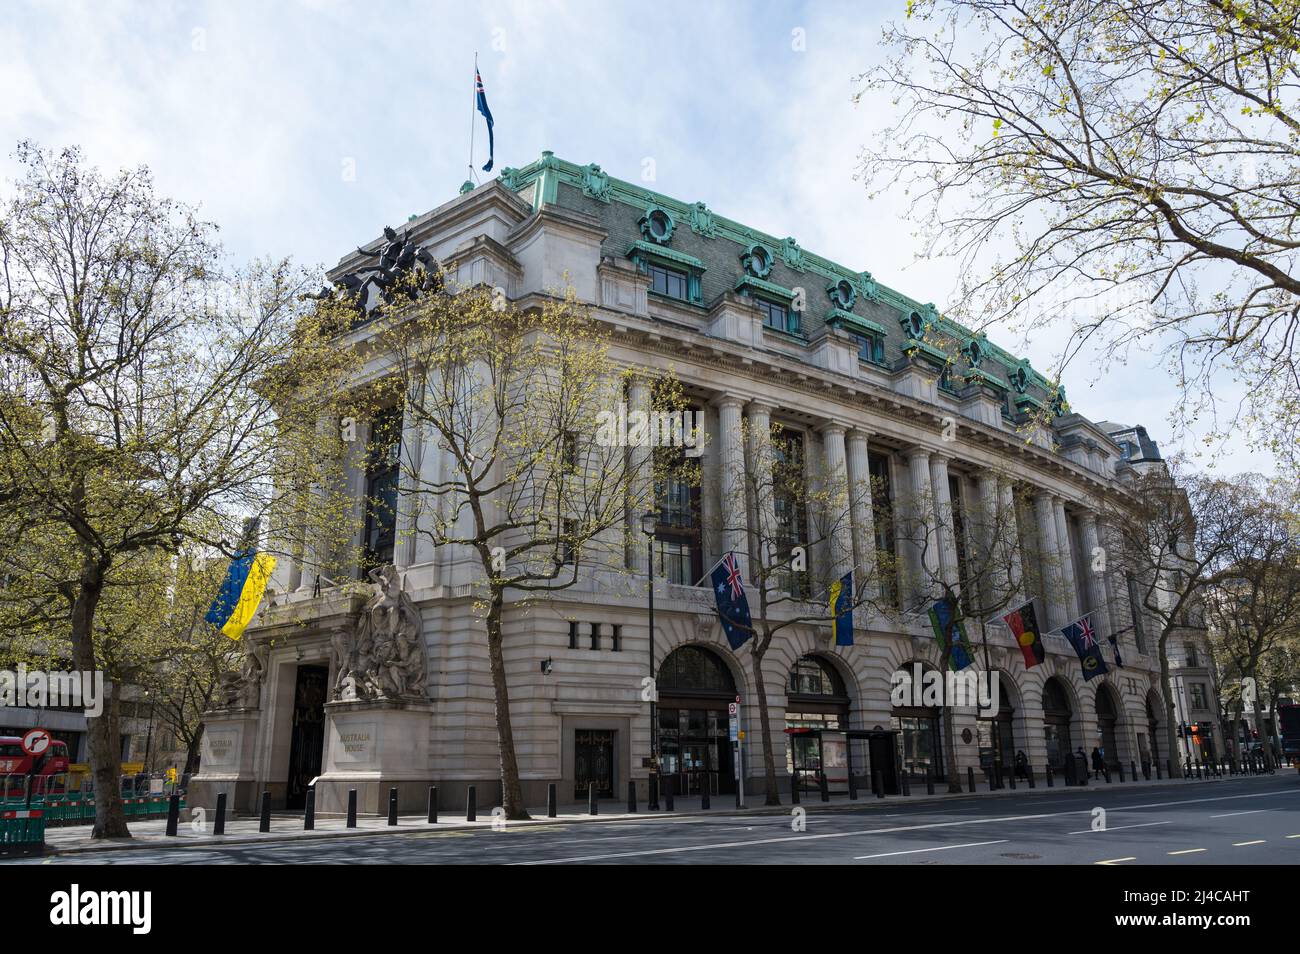 Australia House on Strand, London, England, UK. In solidarity with Ukraine the Ukrainian national flag displayed prominent above the main entrance. Stock Photo